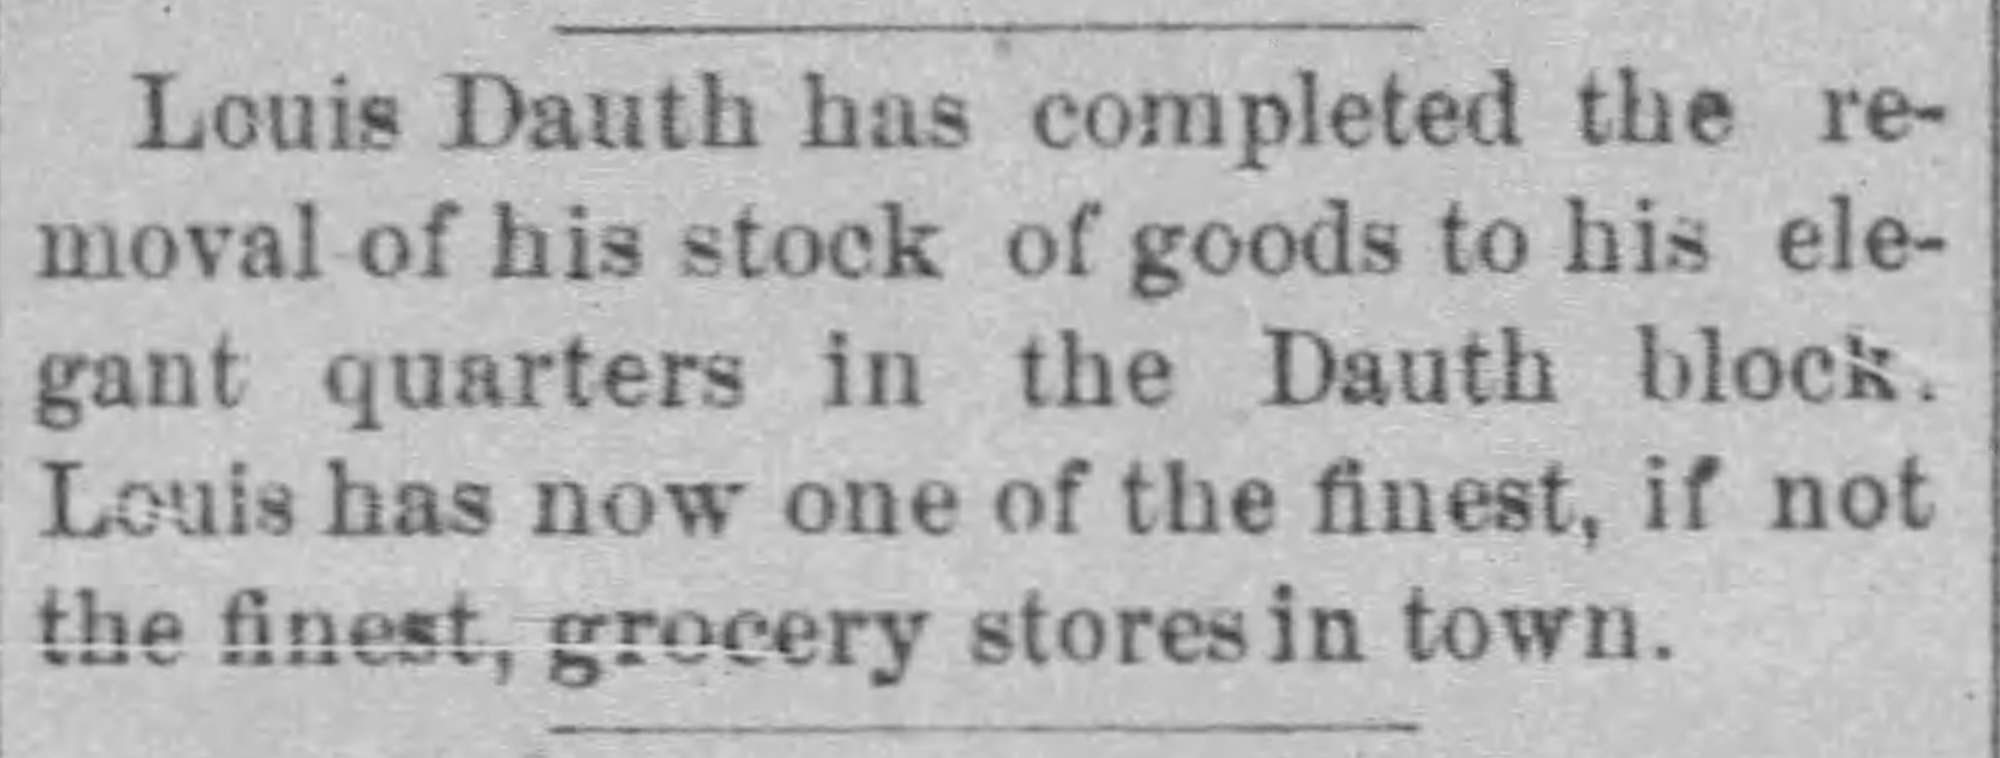 Dauth Family Archive - 1883-01-31 - Daily Evening Courier - Louis Dauth Ready To Move Into Reed-Dauth Block